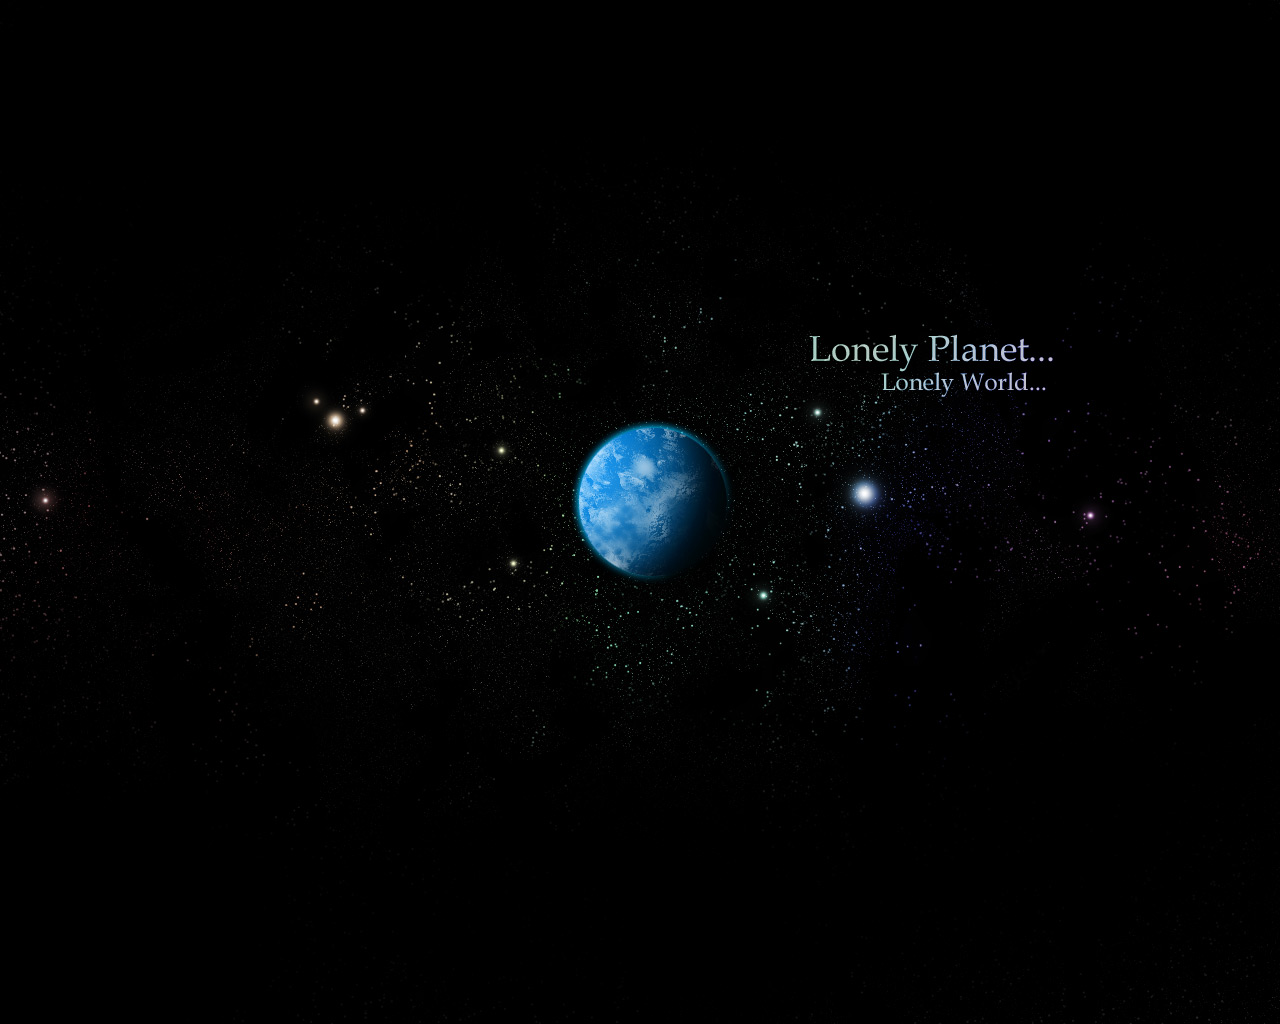 Lonely Planet, Lonely World... by bluelance on DeviantArt